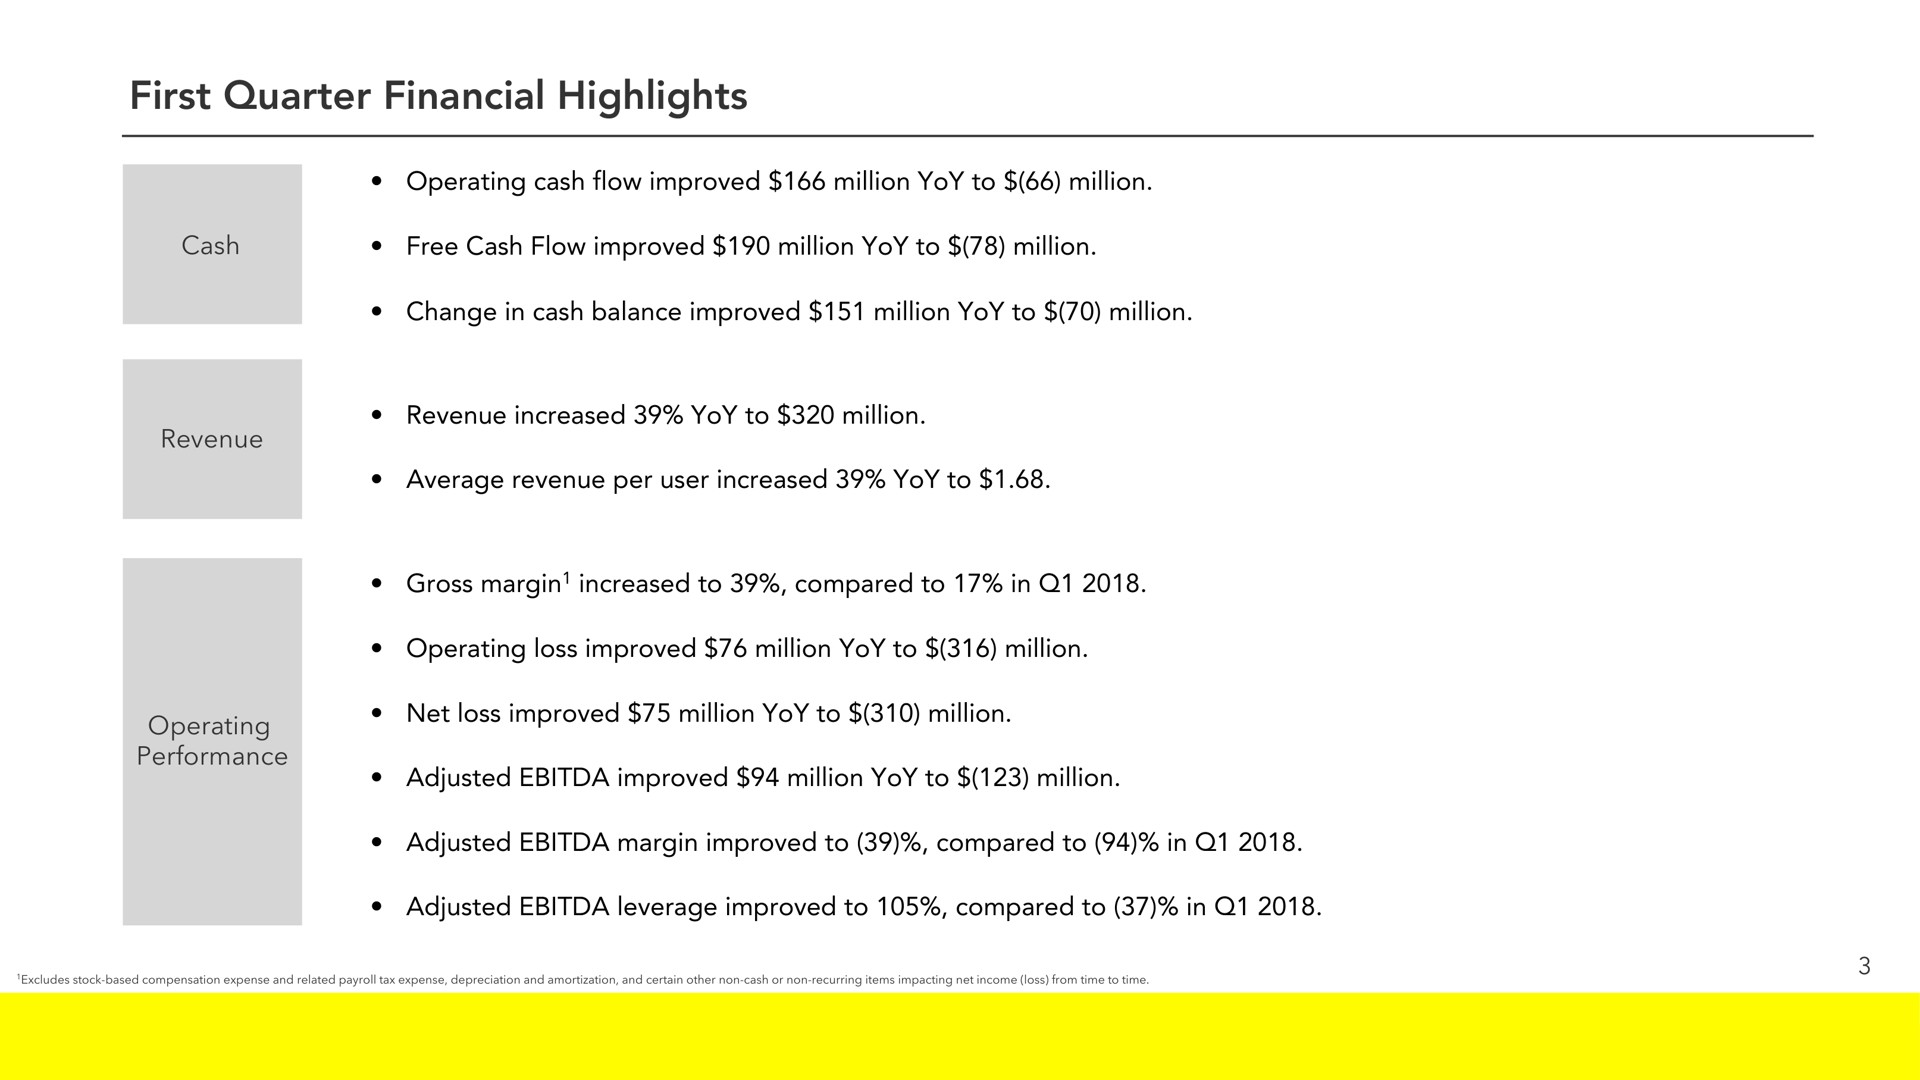 first quarter financial highlights performance operating cash flow improved million yoy to million change in cash balance improved million yoy to million average revenue per user increased yoy to gross margin increased to compared to in operating loss improved million yoy to million adjusted improved million yoy to million adjusted margin improved to compared to in adjusted leverage improved to compared to in | Snap Inc